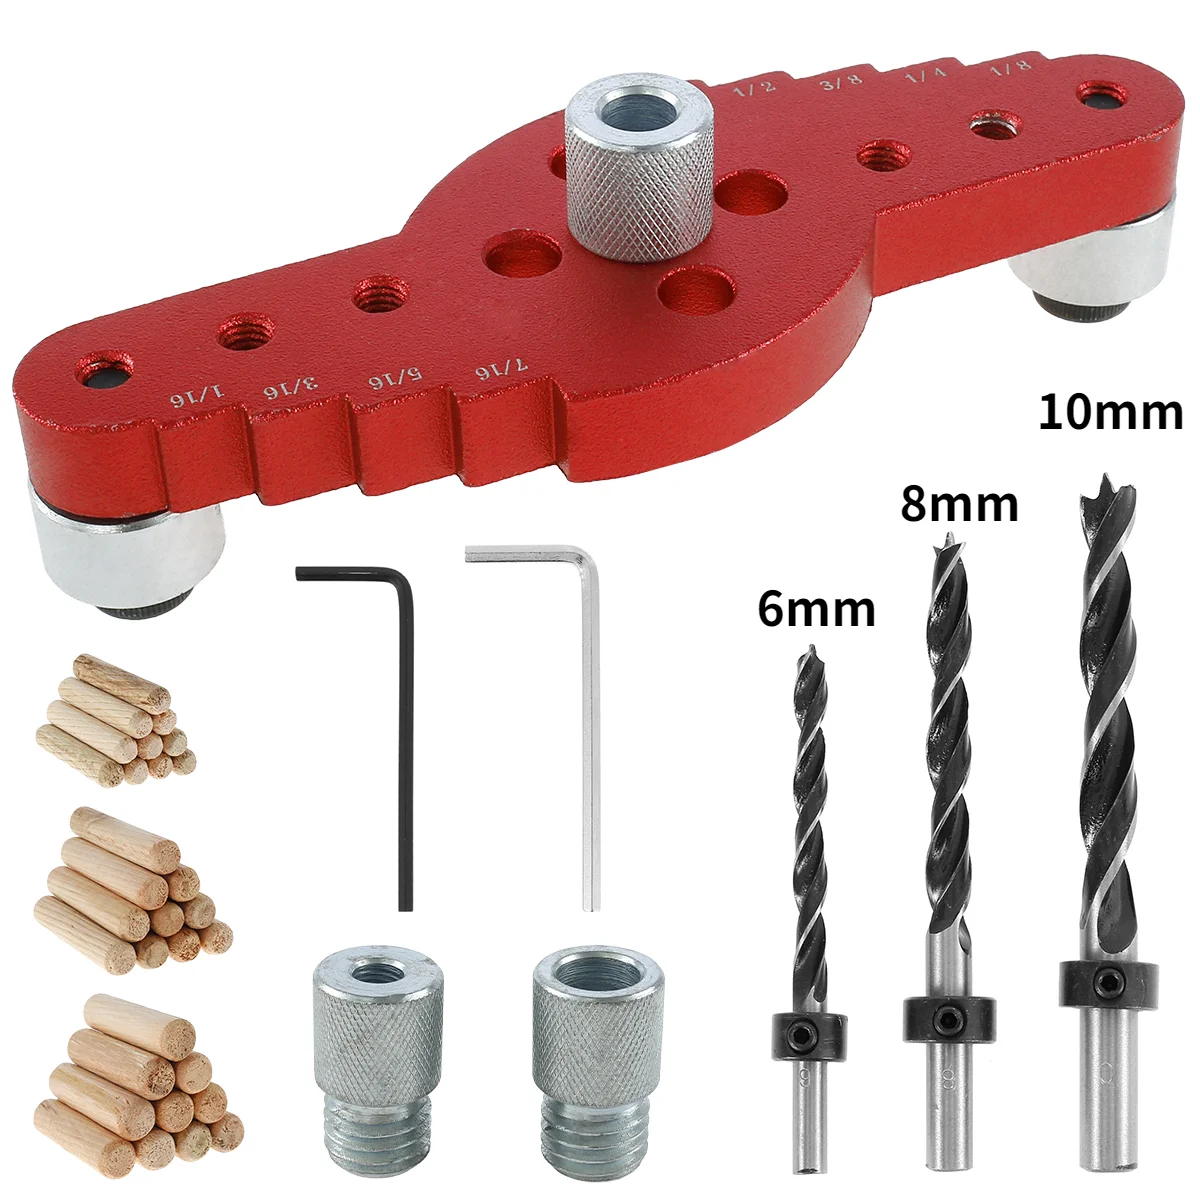 

Wood Dowelling Self Centering Drill Guide Kit Carpentry Tools 6/8/10mm Vertical Pocket Hole Jig Drilling Locator Hole Puncher